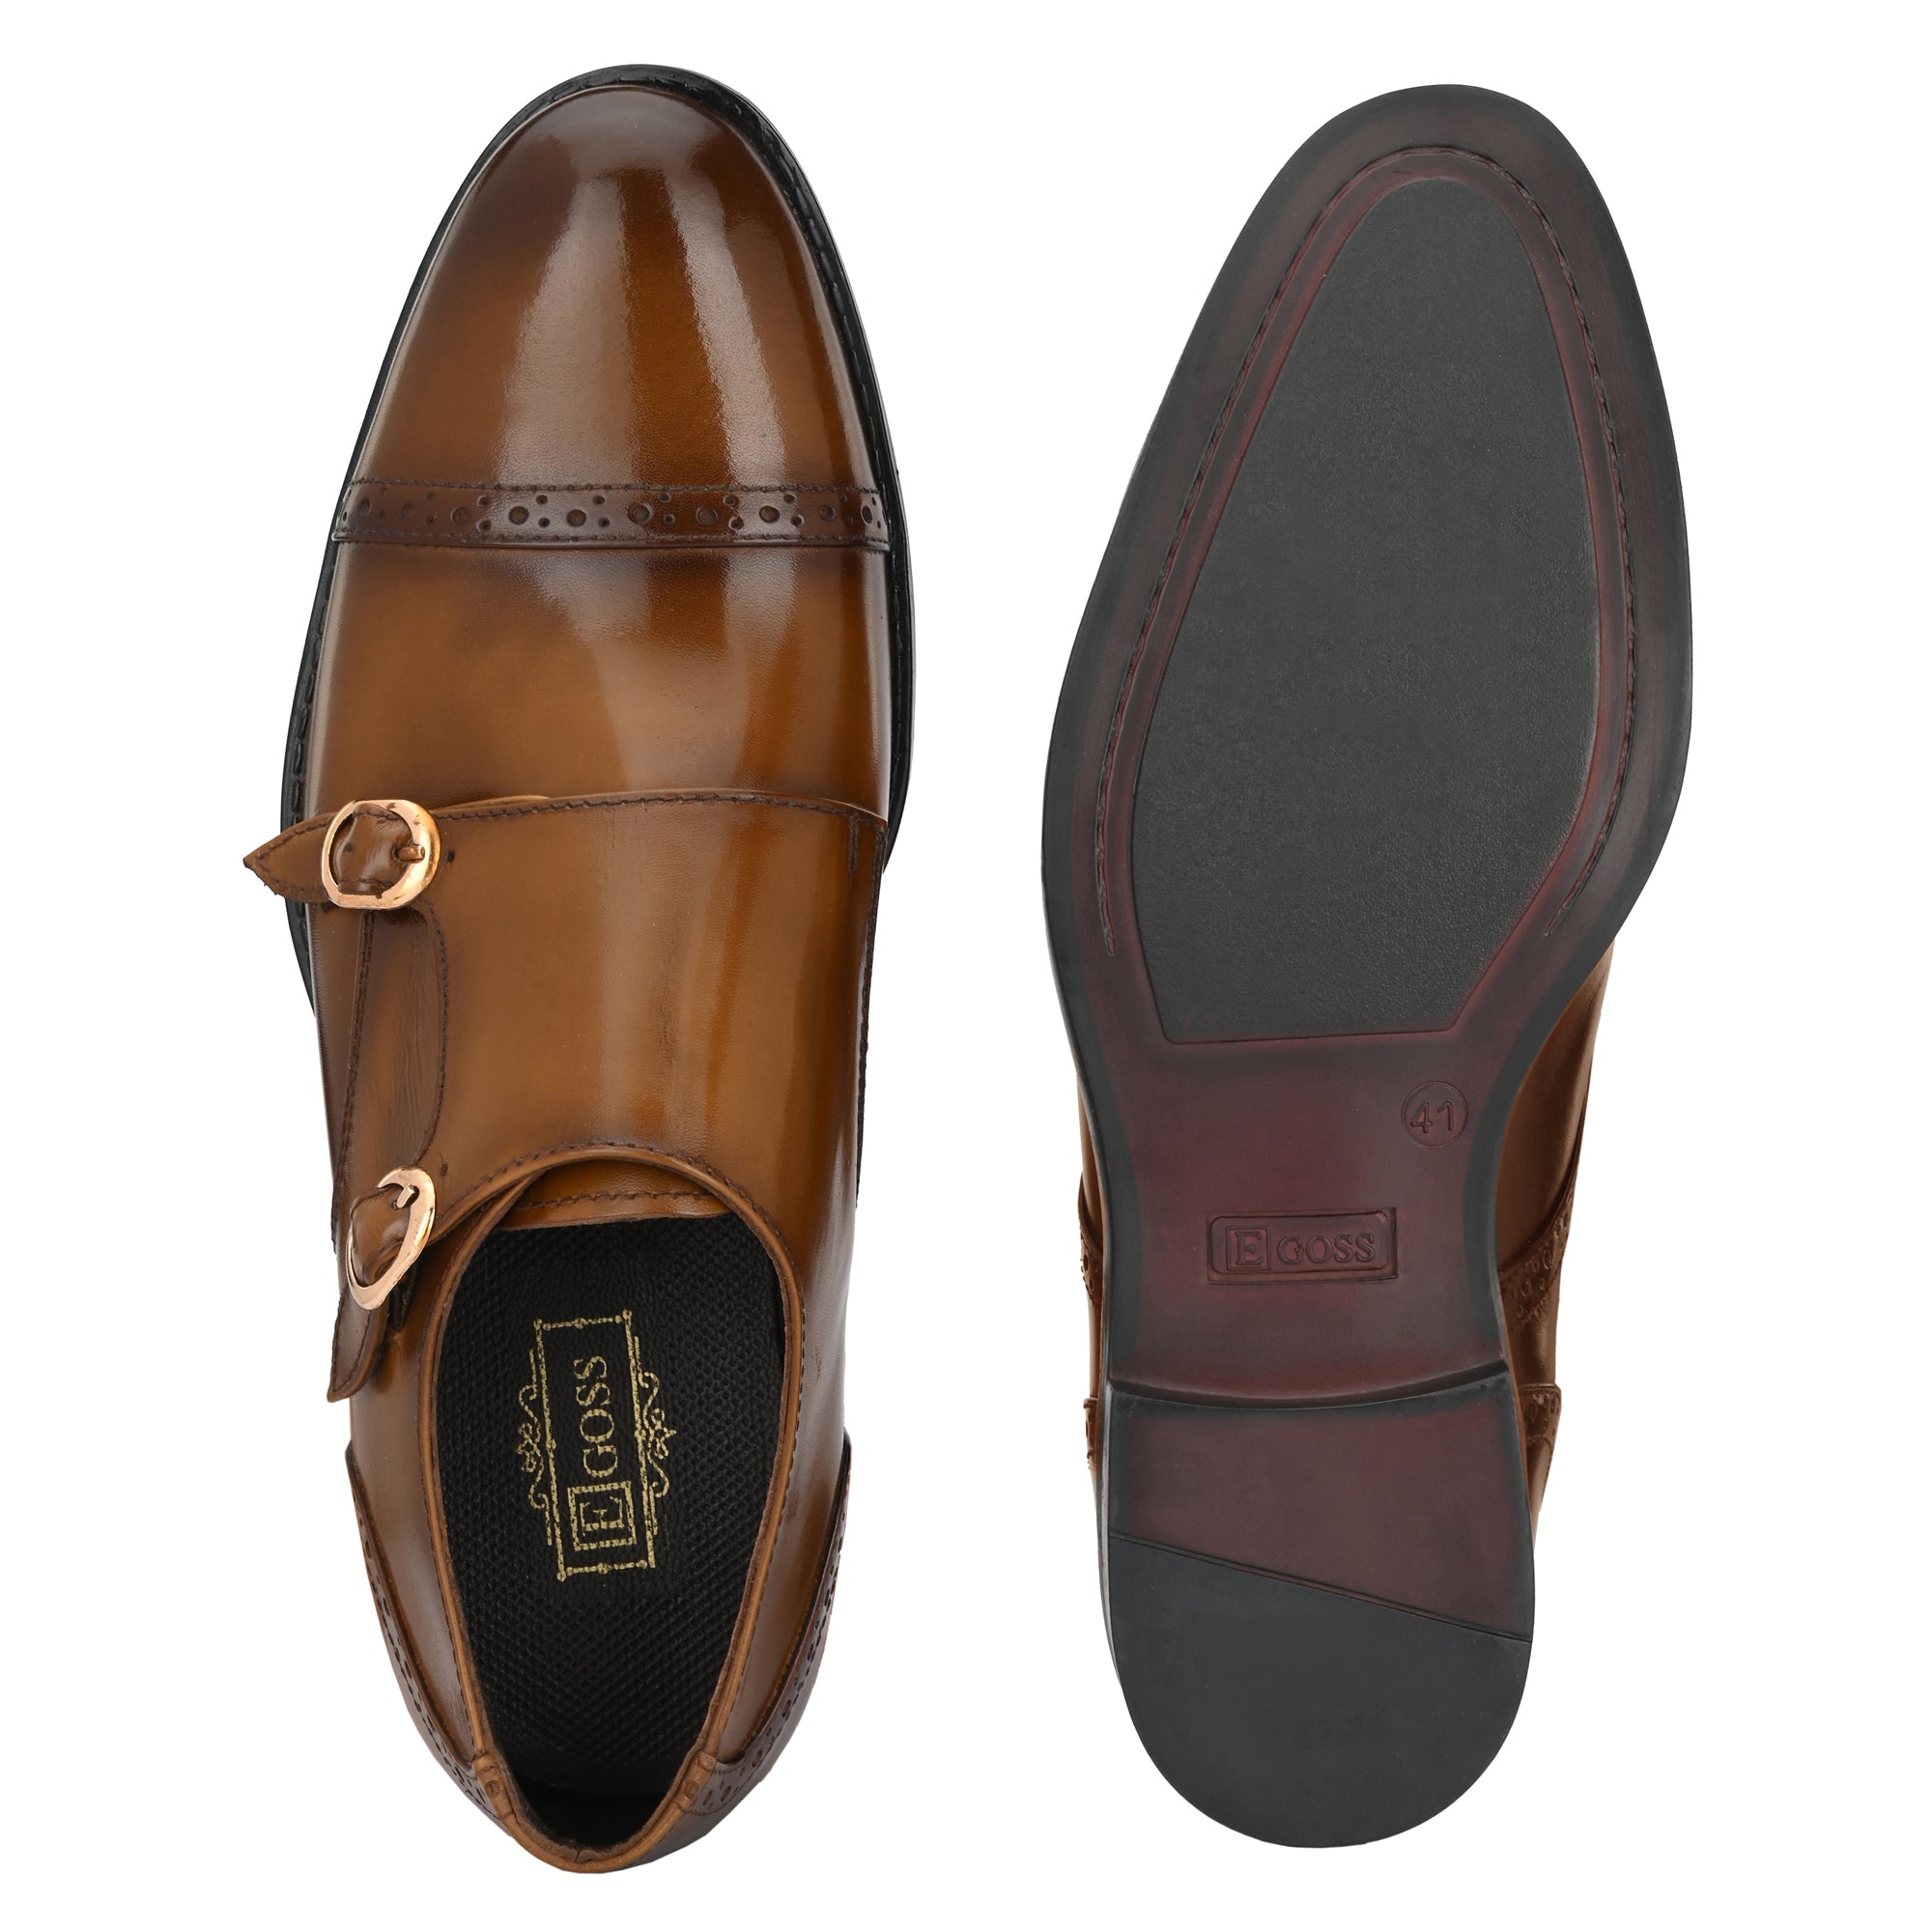 Formal Leather Buckled Monk Shoes For Men